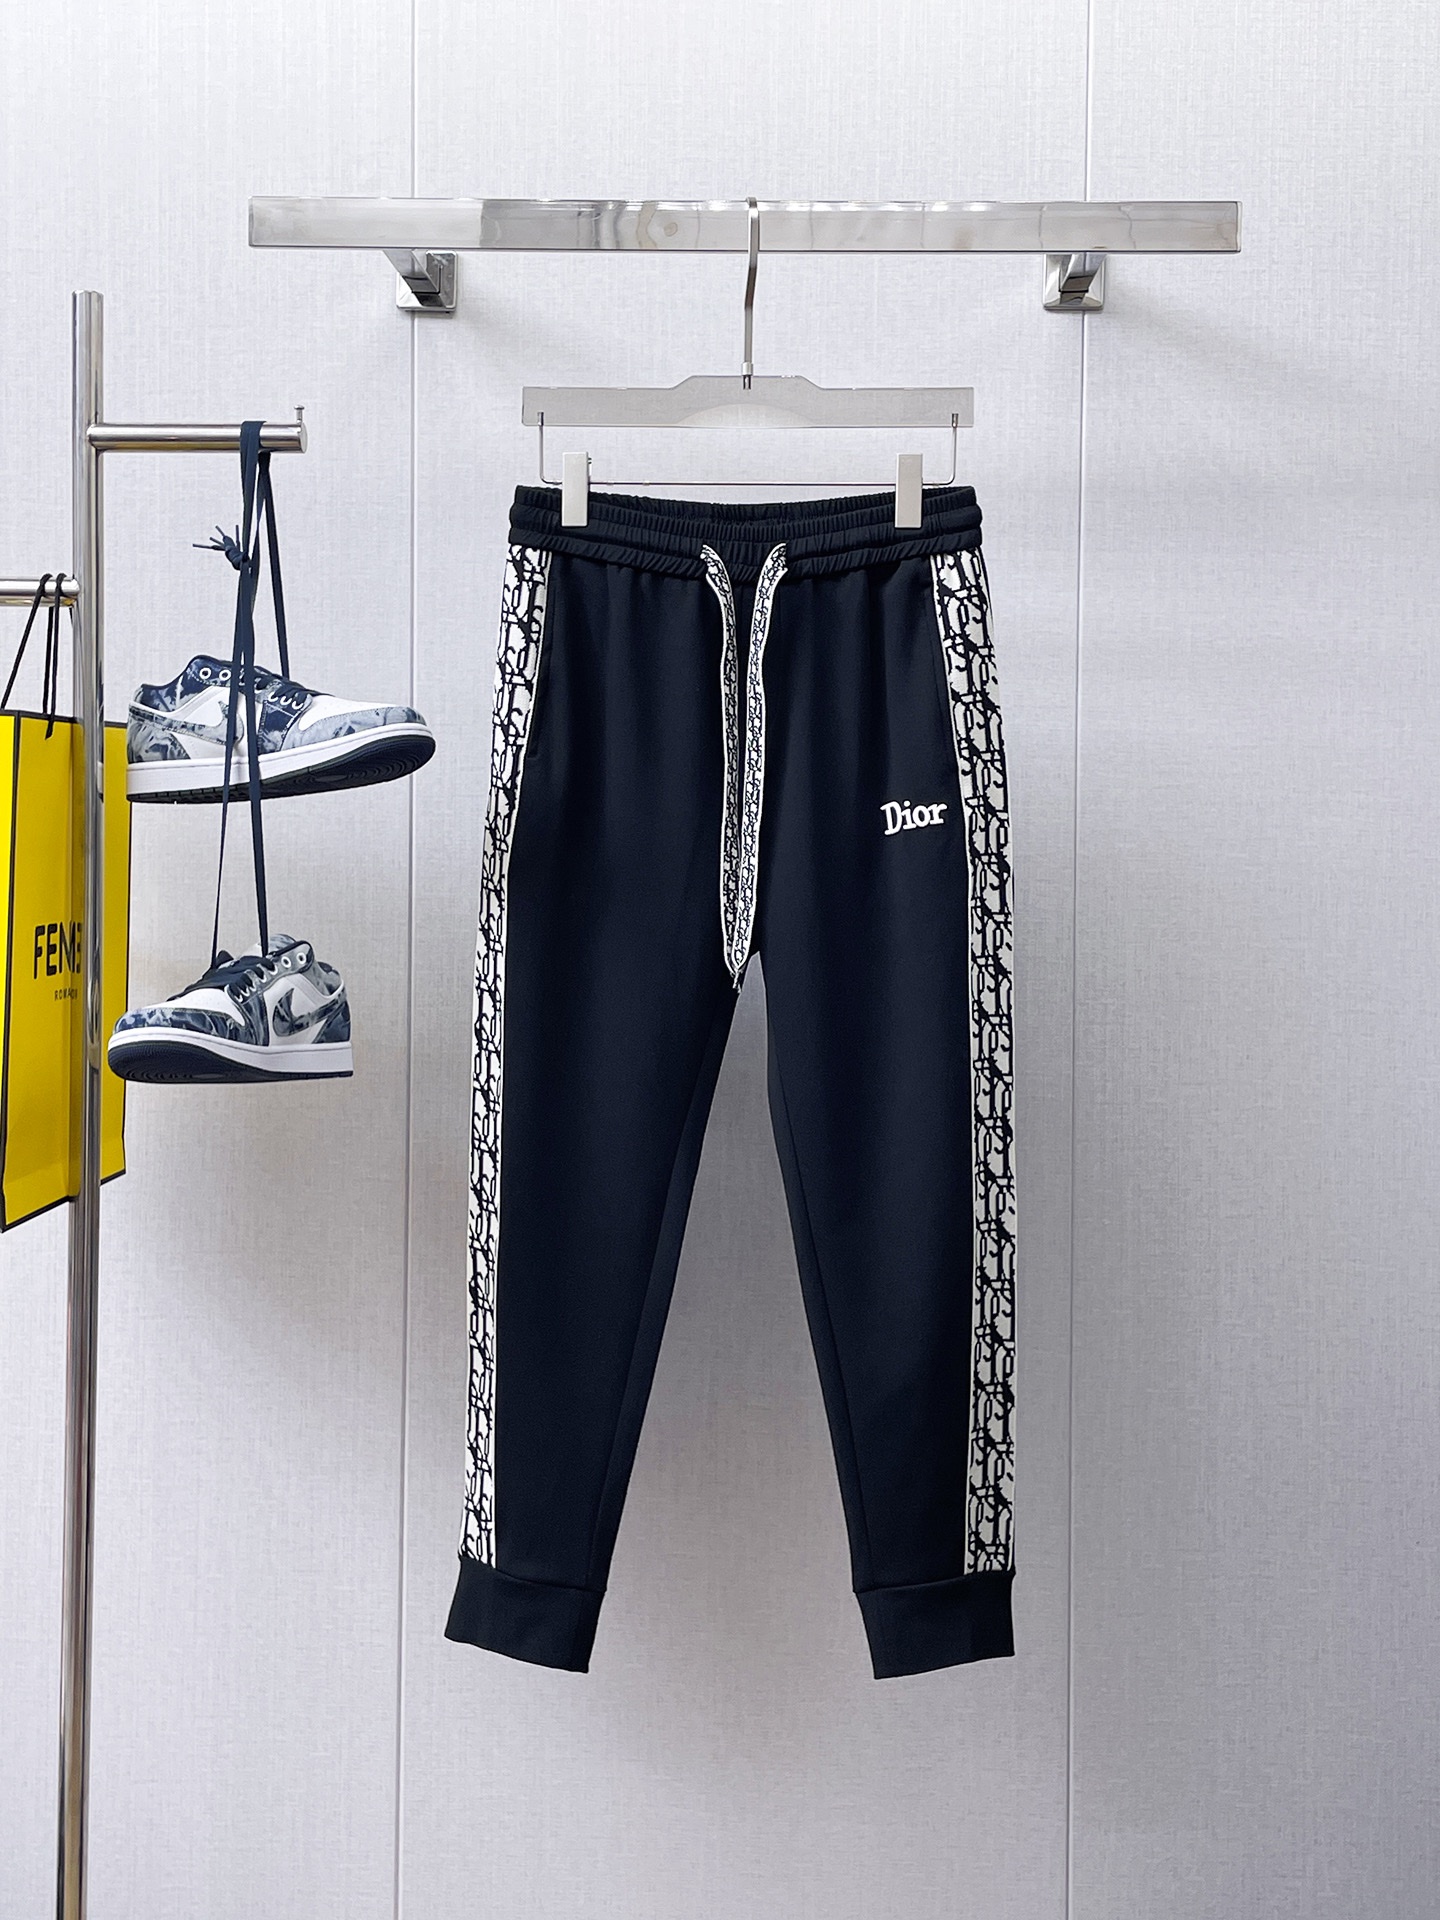 Dior Clothing Pants & Trousers Summer Collection Casual